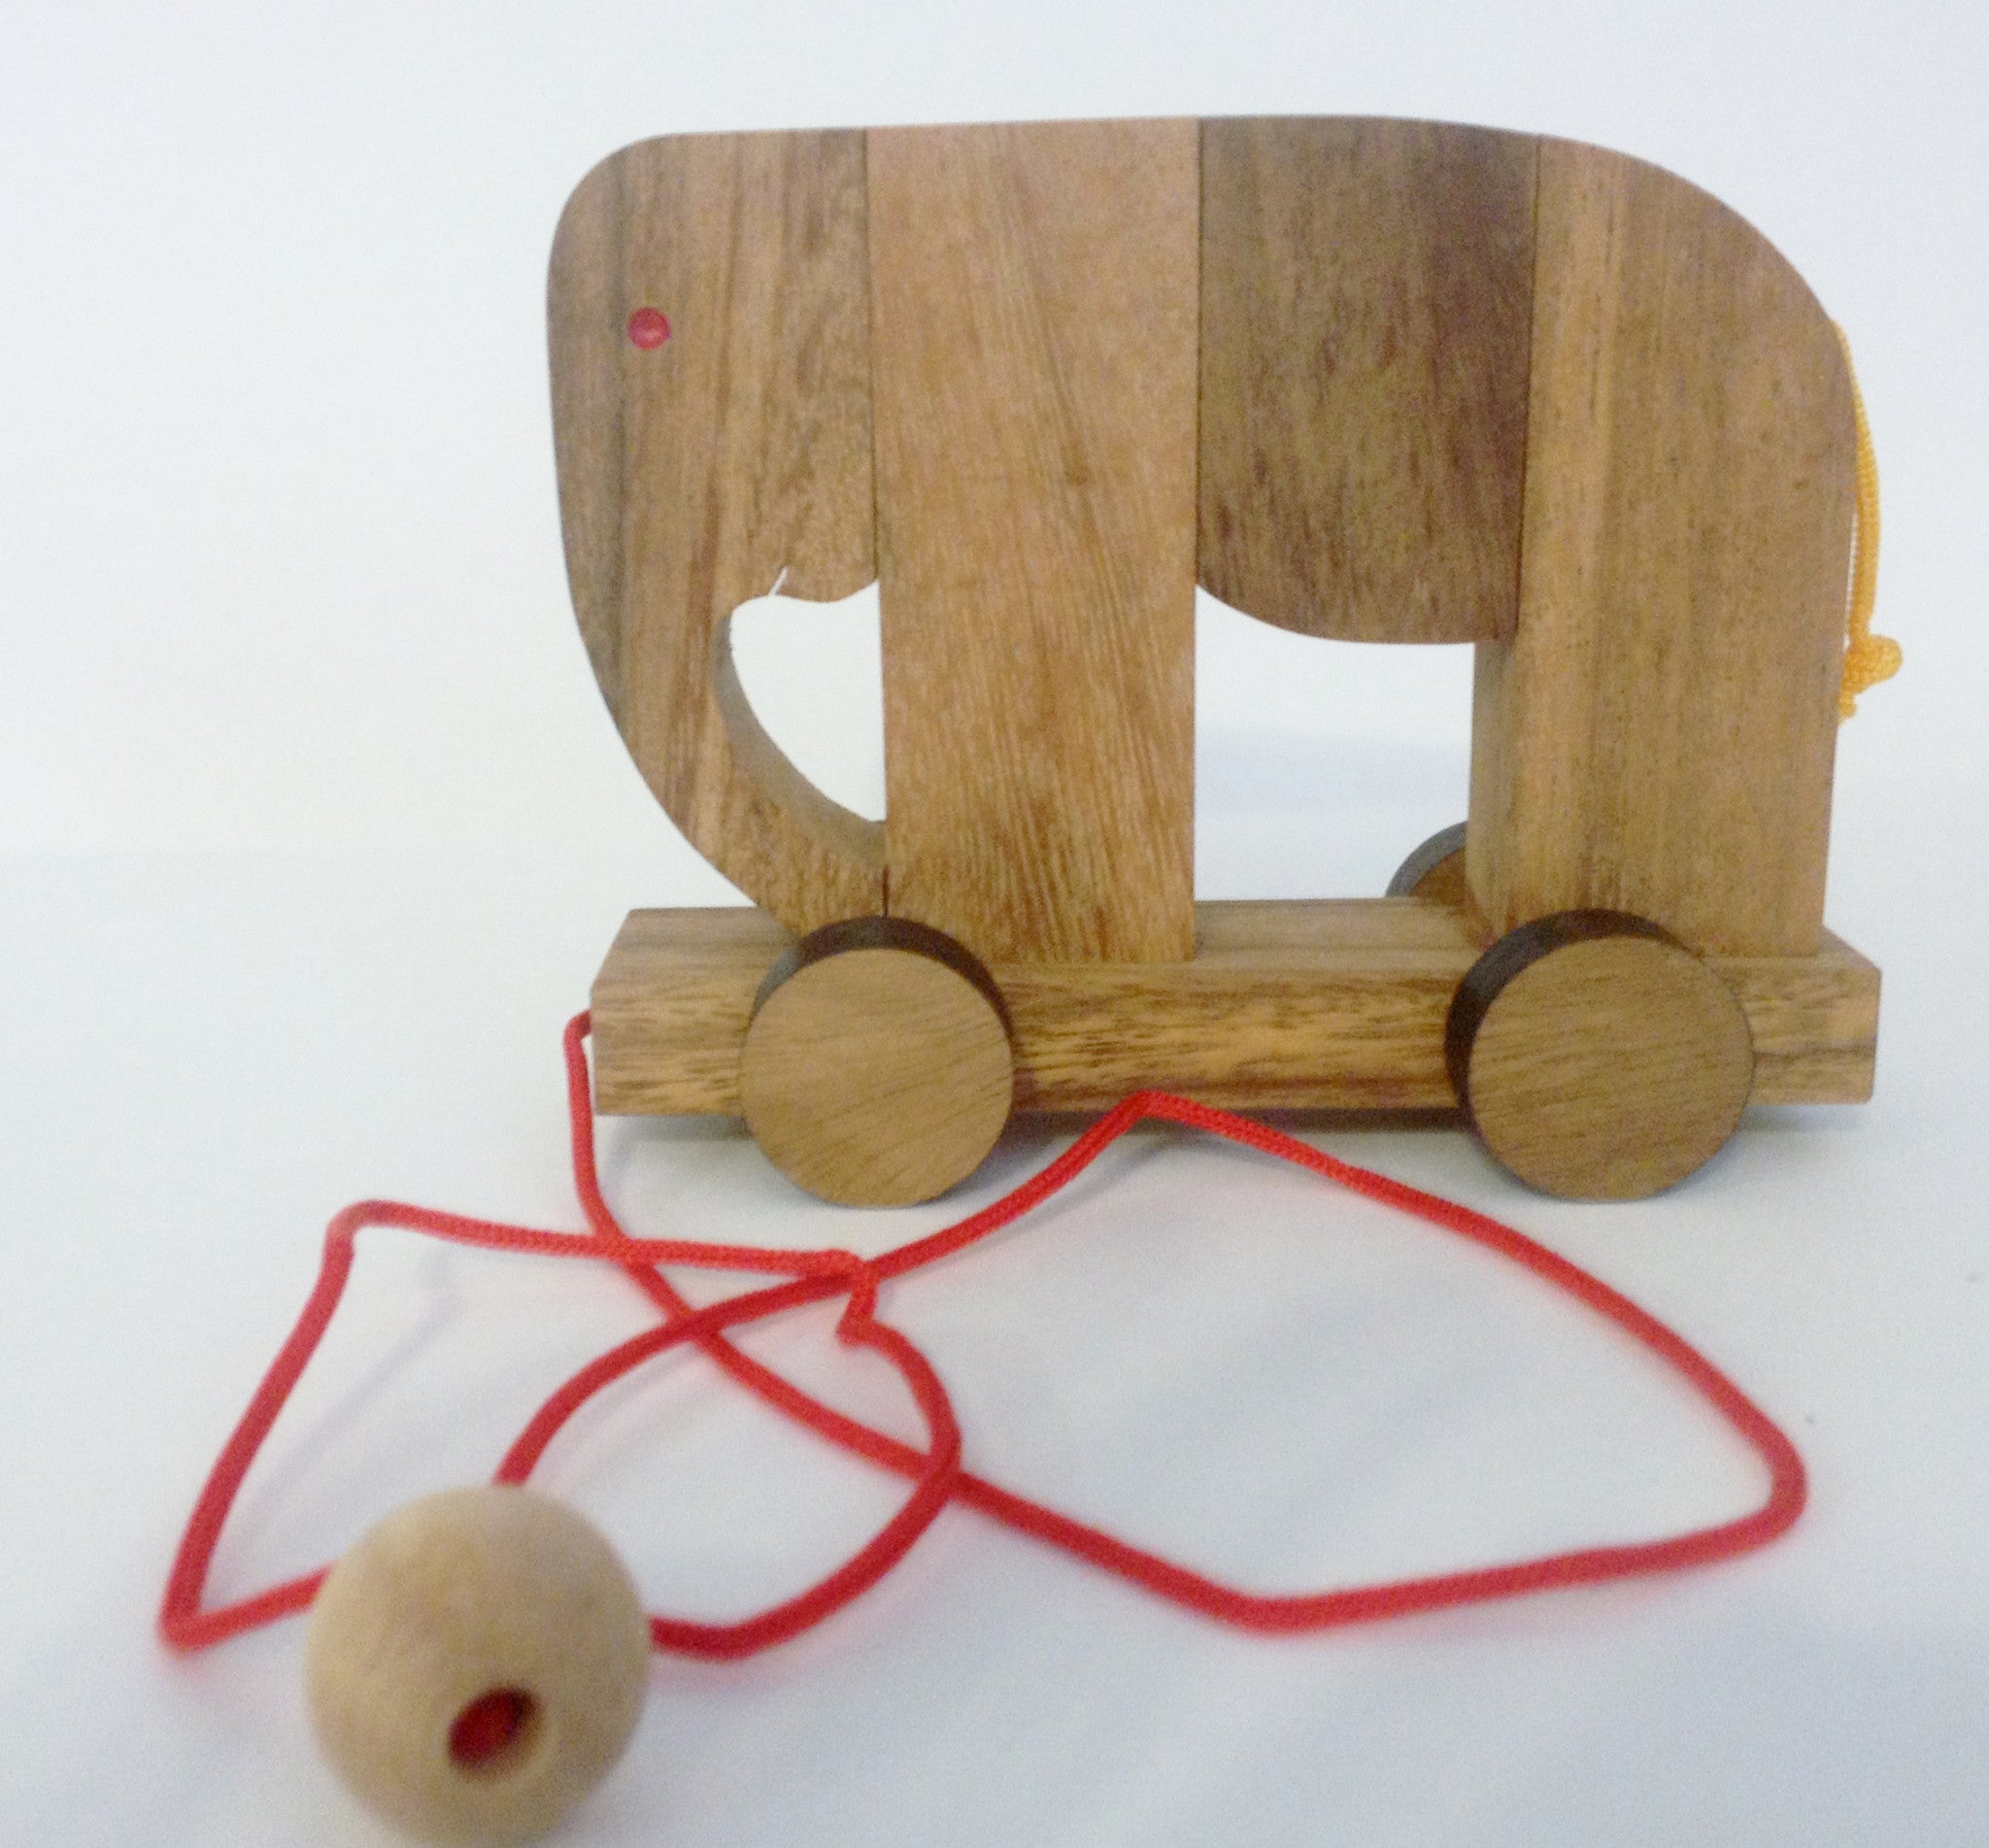 Play with this handcrafted wooden elephant, you can separate each 